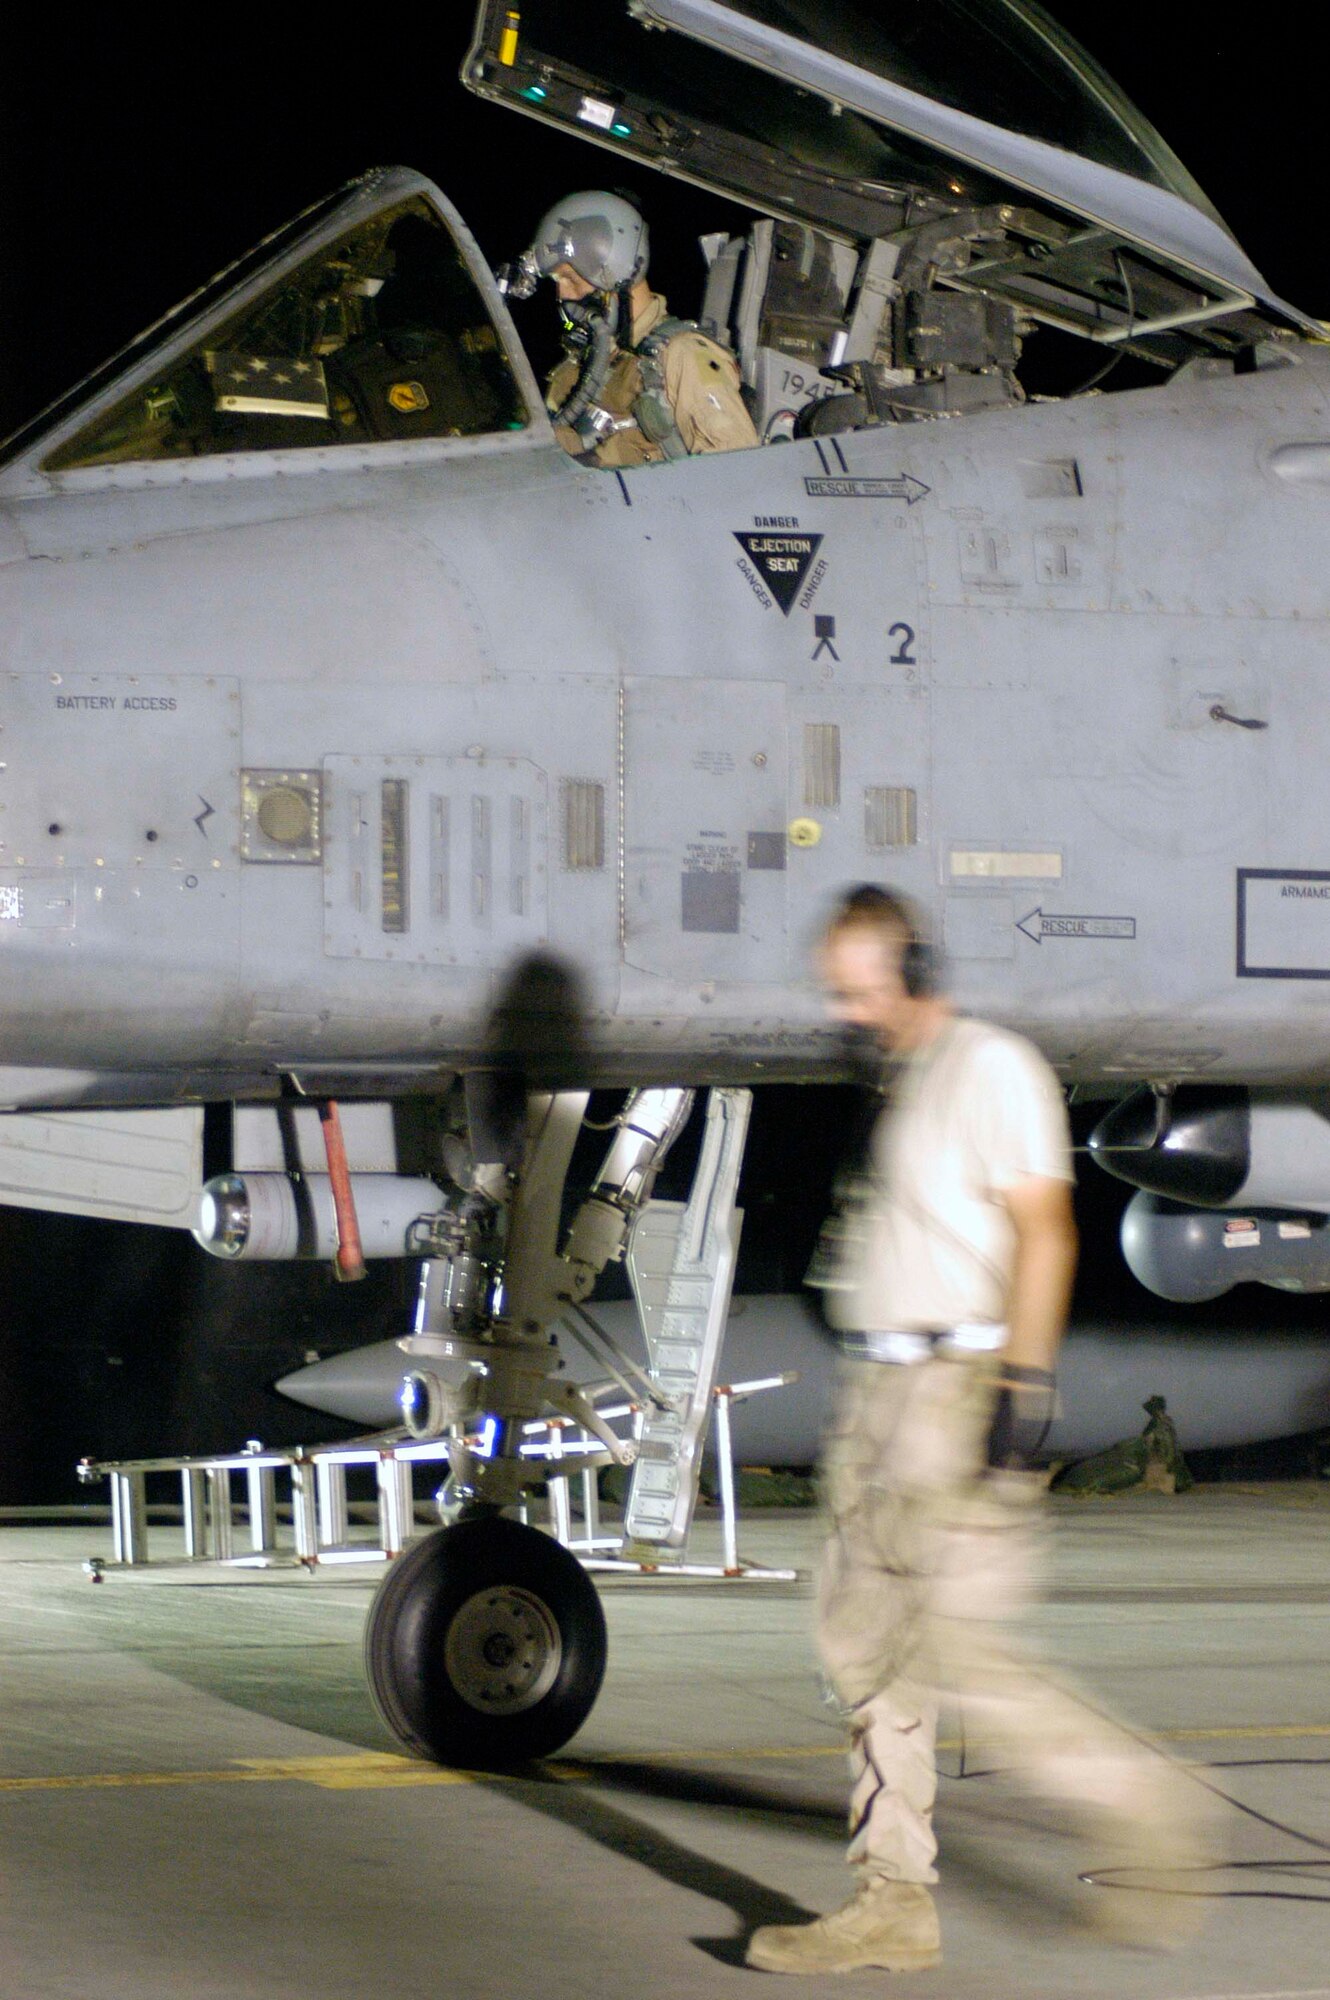 Capt. Rick Mitchell, pilot, prepares an A-10 Thunderbolt II for a nighttime sortie over Afghanistan with the help of a crew chief on the ground, Staff Sgt. Scott Gaitley, at Bagram Airfield, Afghanistan, in early August.  Both are deployed from the 442nd Fighter Wing, an Air Force Reserve A-10 unit, based at Whiteman Air Force Base, Mo.  (US Air Force photo/Maj. David Kurle)